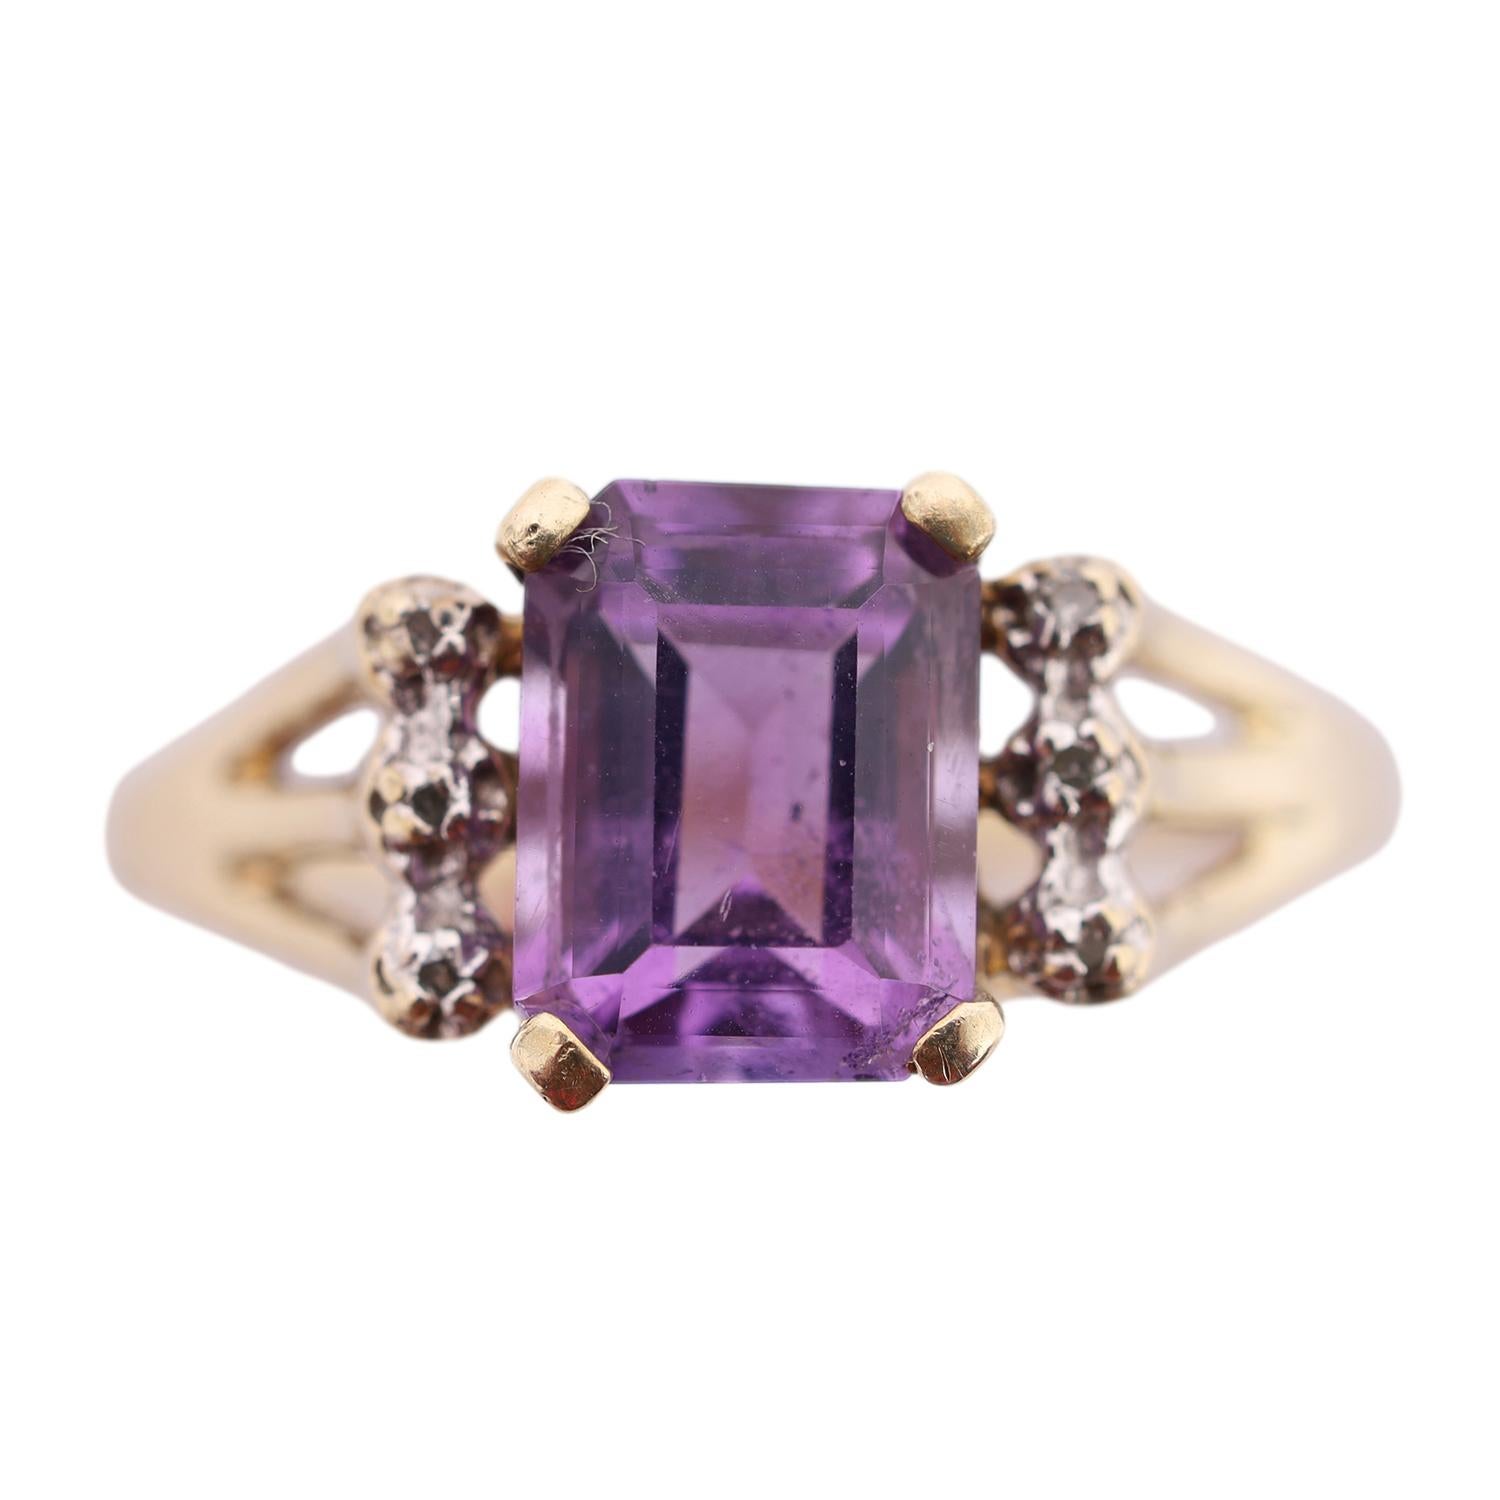 Curated by The Lady Bag Ladies 

Being offered for sale is a 10K Yellow Gold Emerald Cut Amethyst and Diamond Ring

The ring features an emerald cut middle stone prong set amethyst. It measures in at 7.94mm in length and 6.08mm in width. Directly on